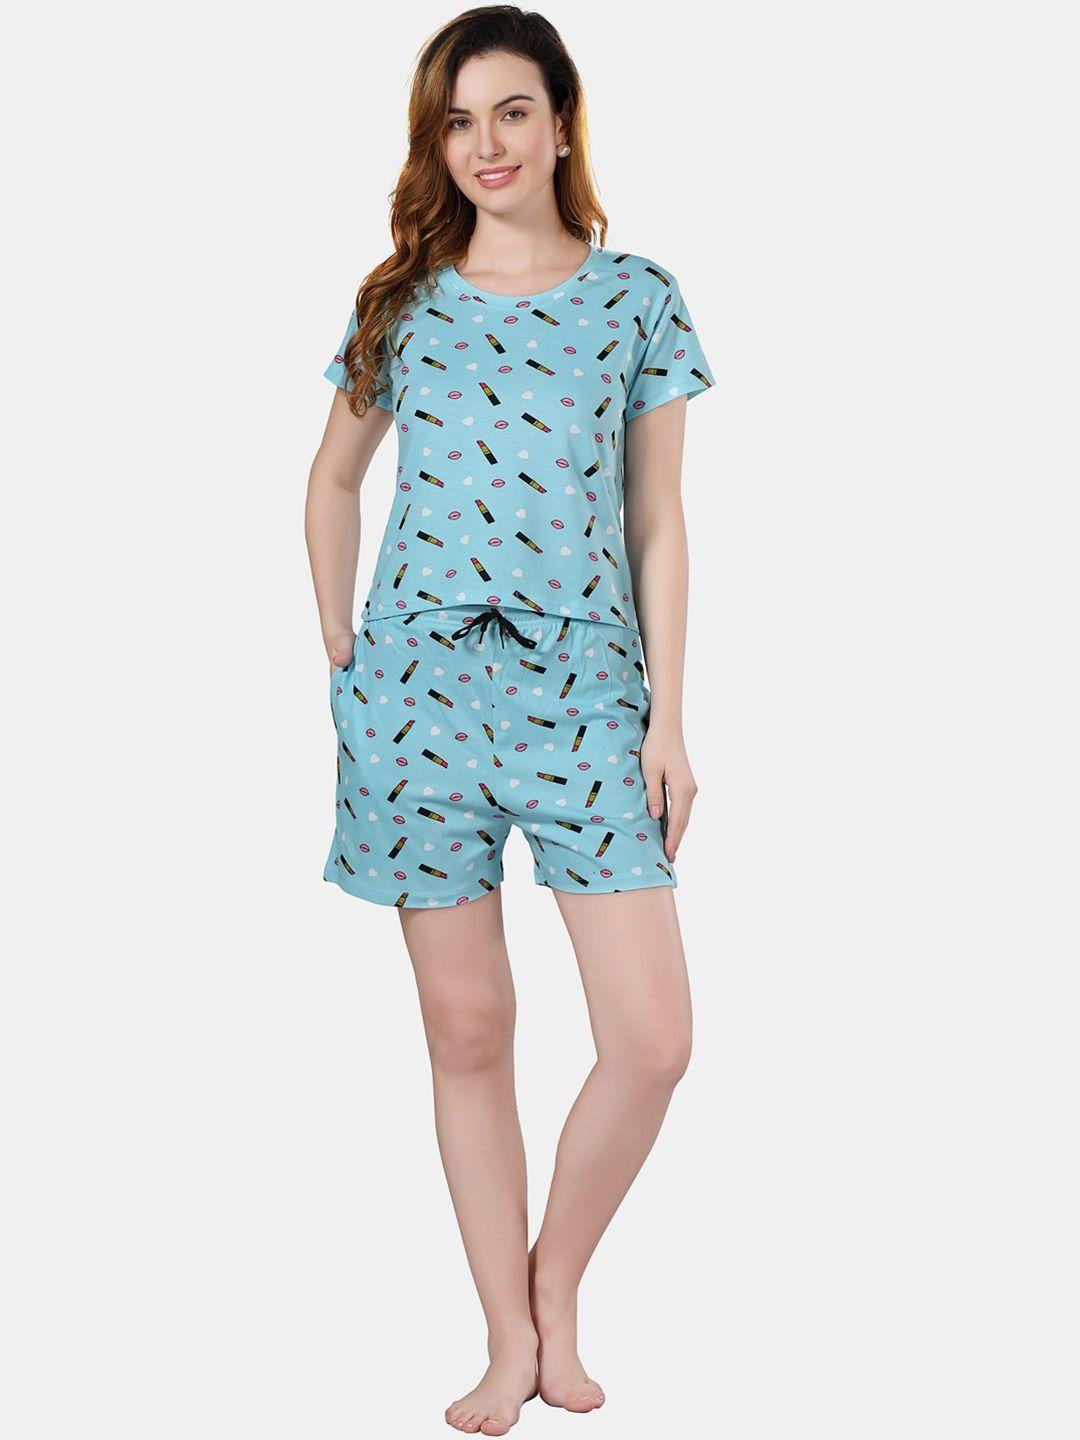 fabme graphic printed night suit